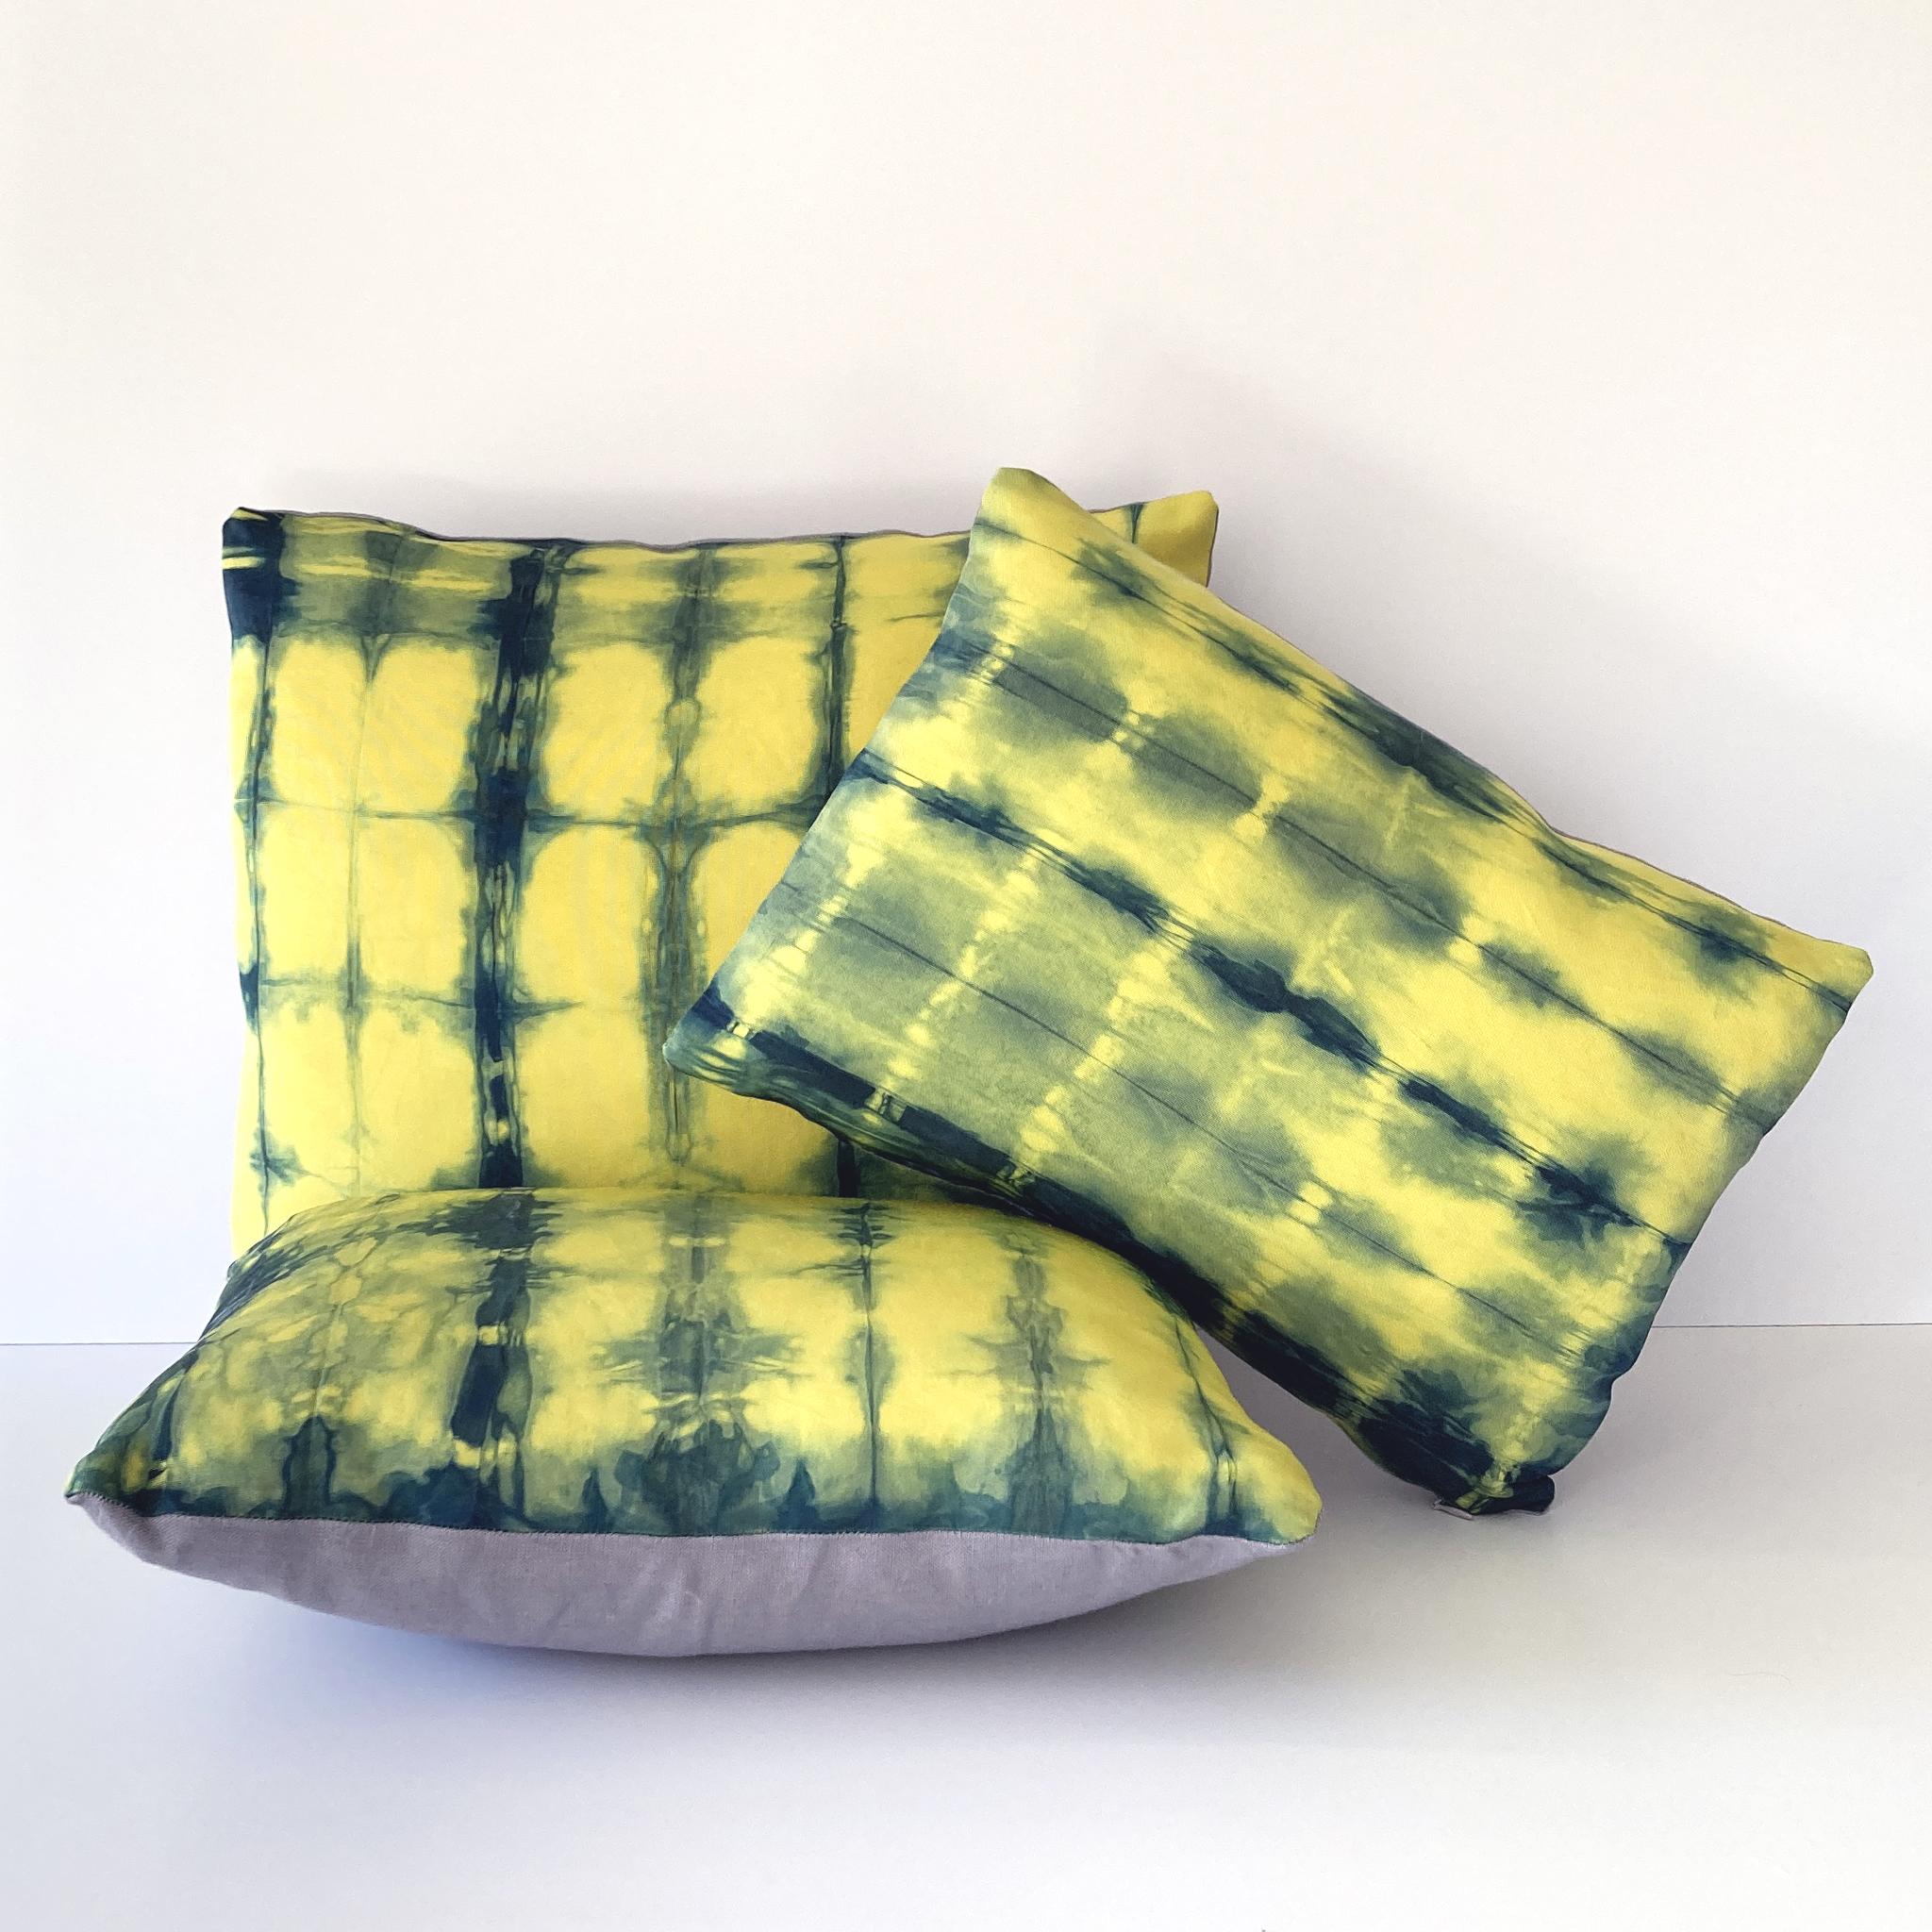 Canary yellow silk faille pillow dyed with indigo in Dash pattern with gray linen backing. Hand-dyed and sewn in New York City, down pillow insert made locally in NYC. Pillow measures 12 x 16 inches. Each silk pillow is hand made and one of a